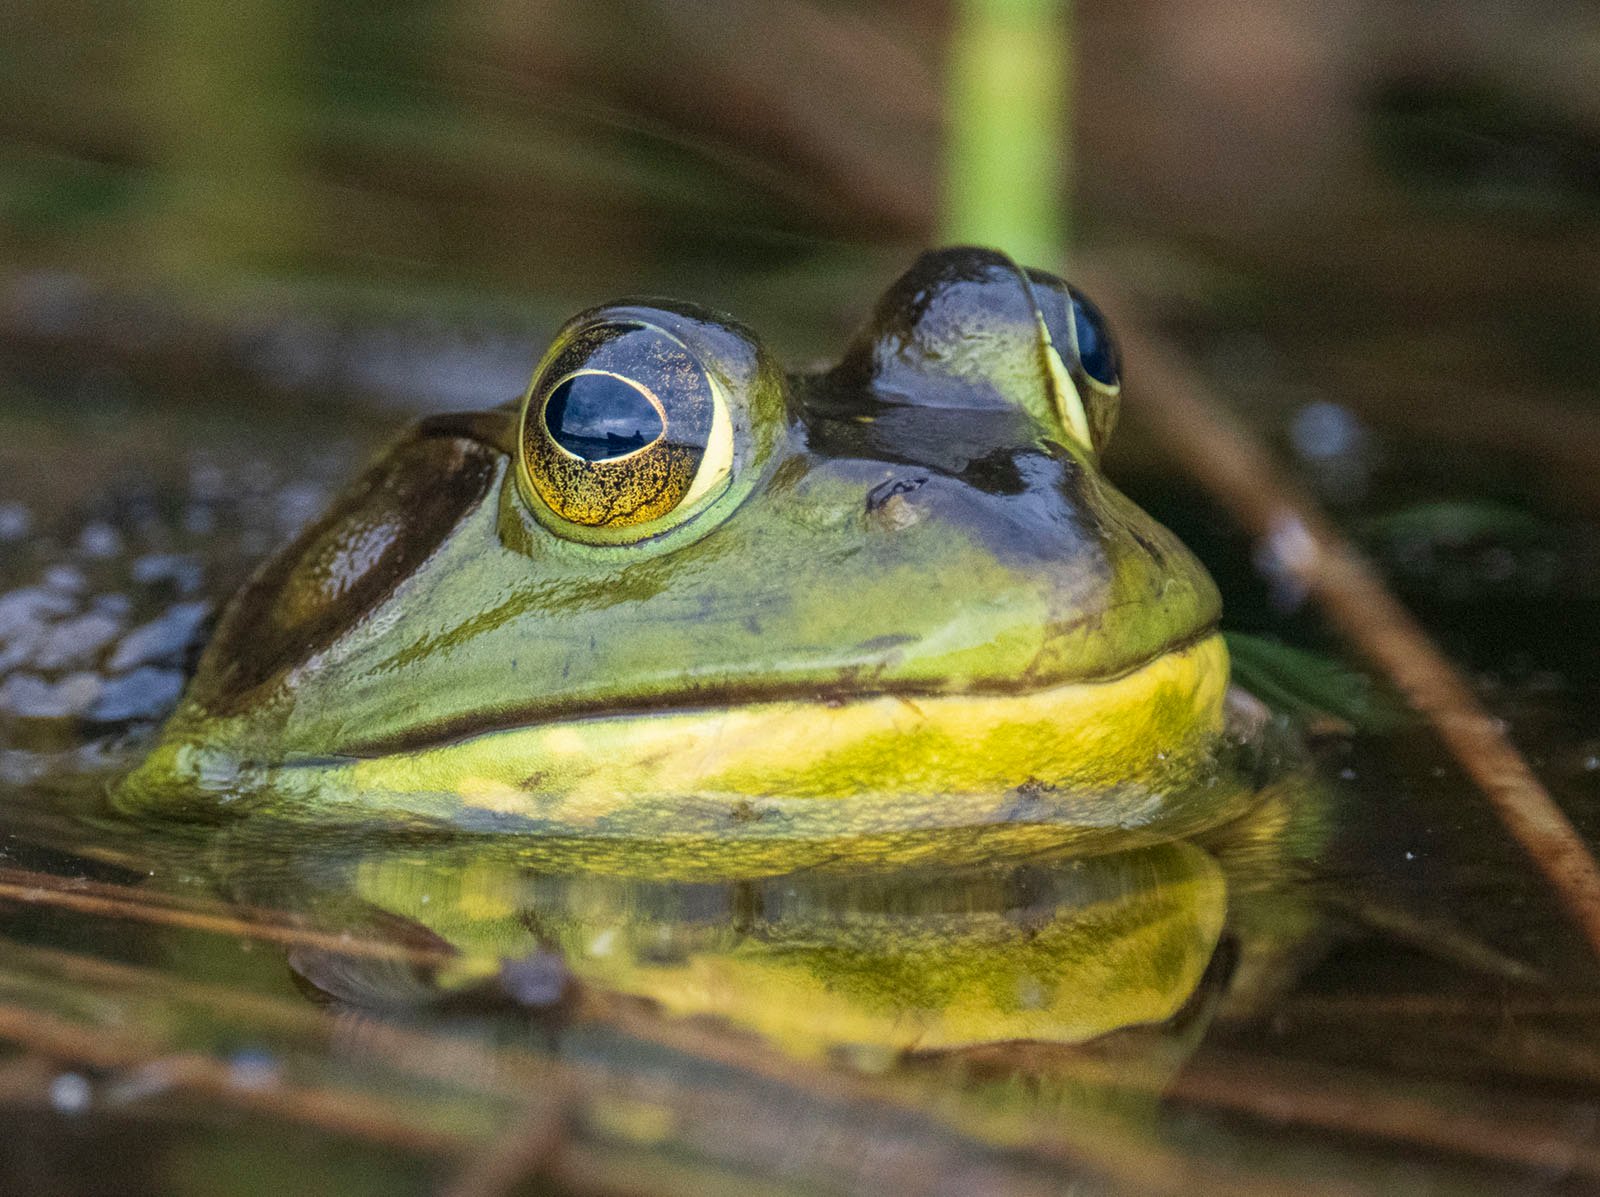 Close-up image of a green and yellow frog partially submerged in water. The frog's eyes are prominently visible above the water's surface, reflecting light. The background is blurred, focusing attention on the frog's face.